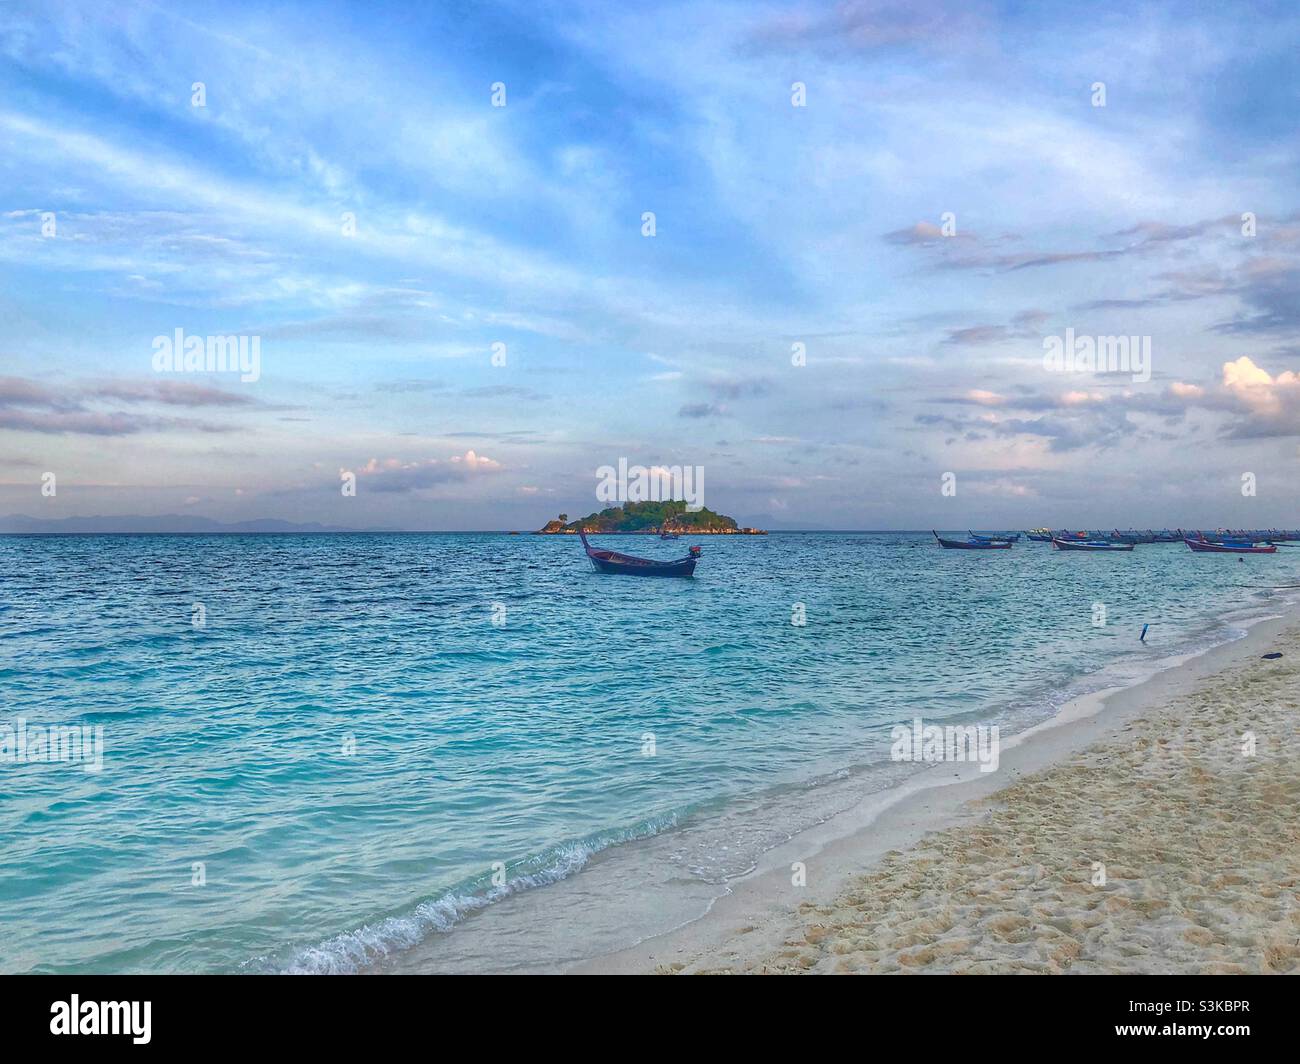 Late afternoon view of traditional longboats anchored at a beach on the island of Koh Lipe in southern Thailand Stock Photo